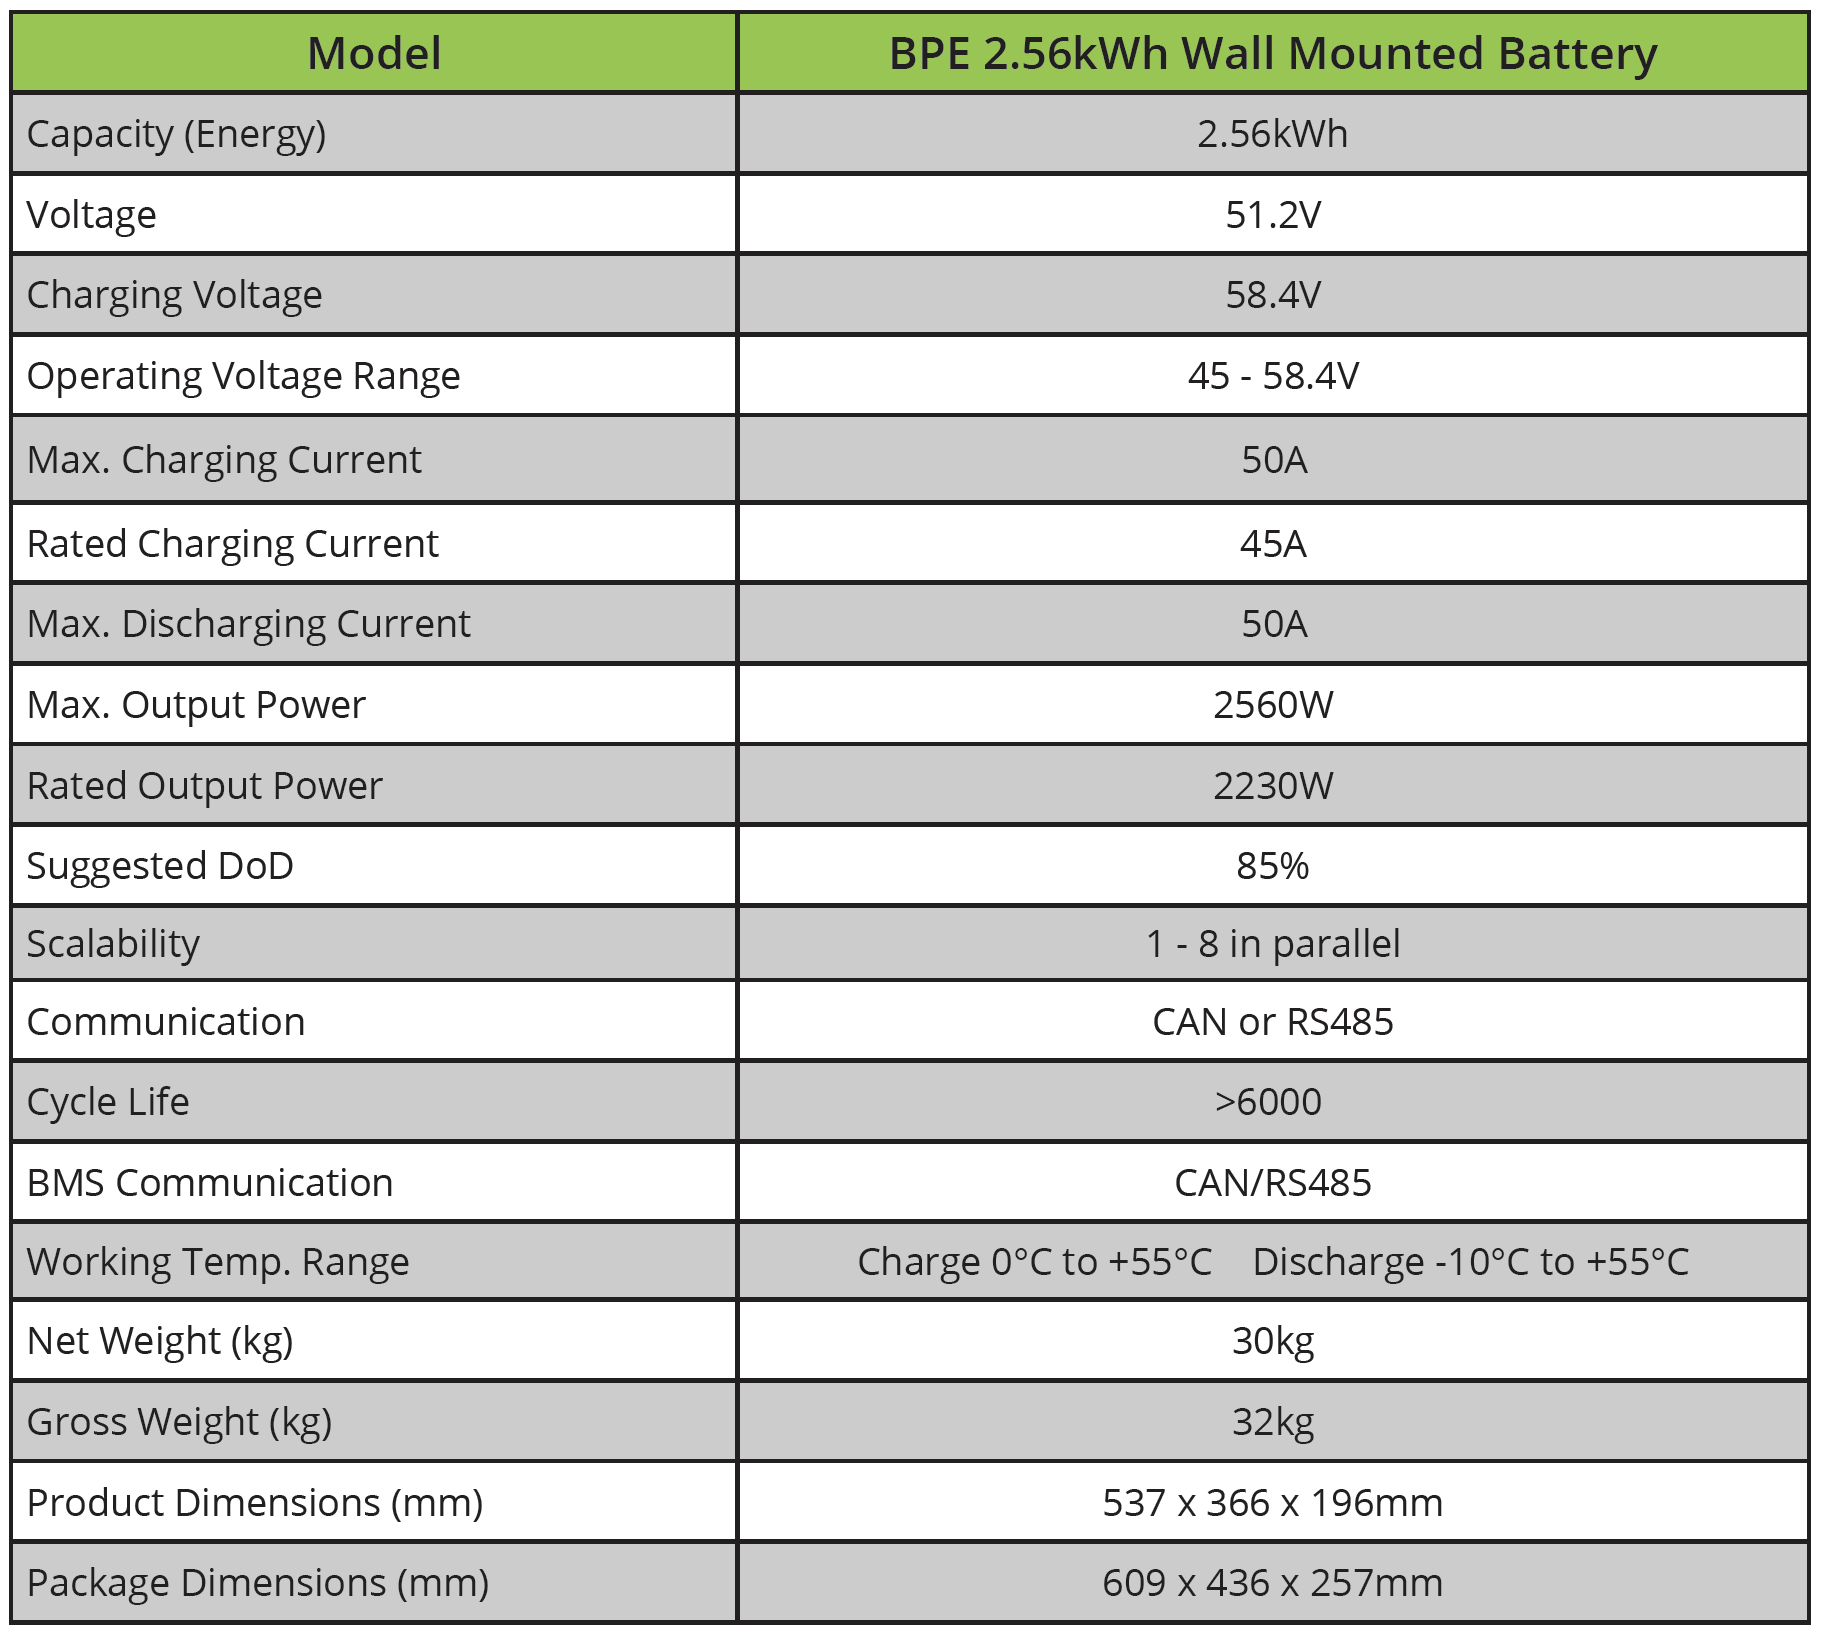 BPE PowerDepot 2.56kWh Specification